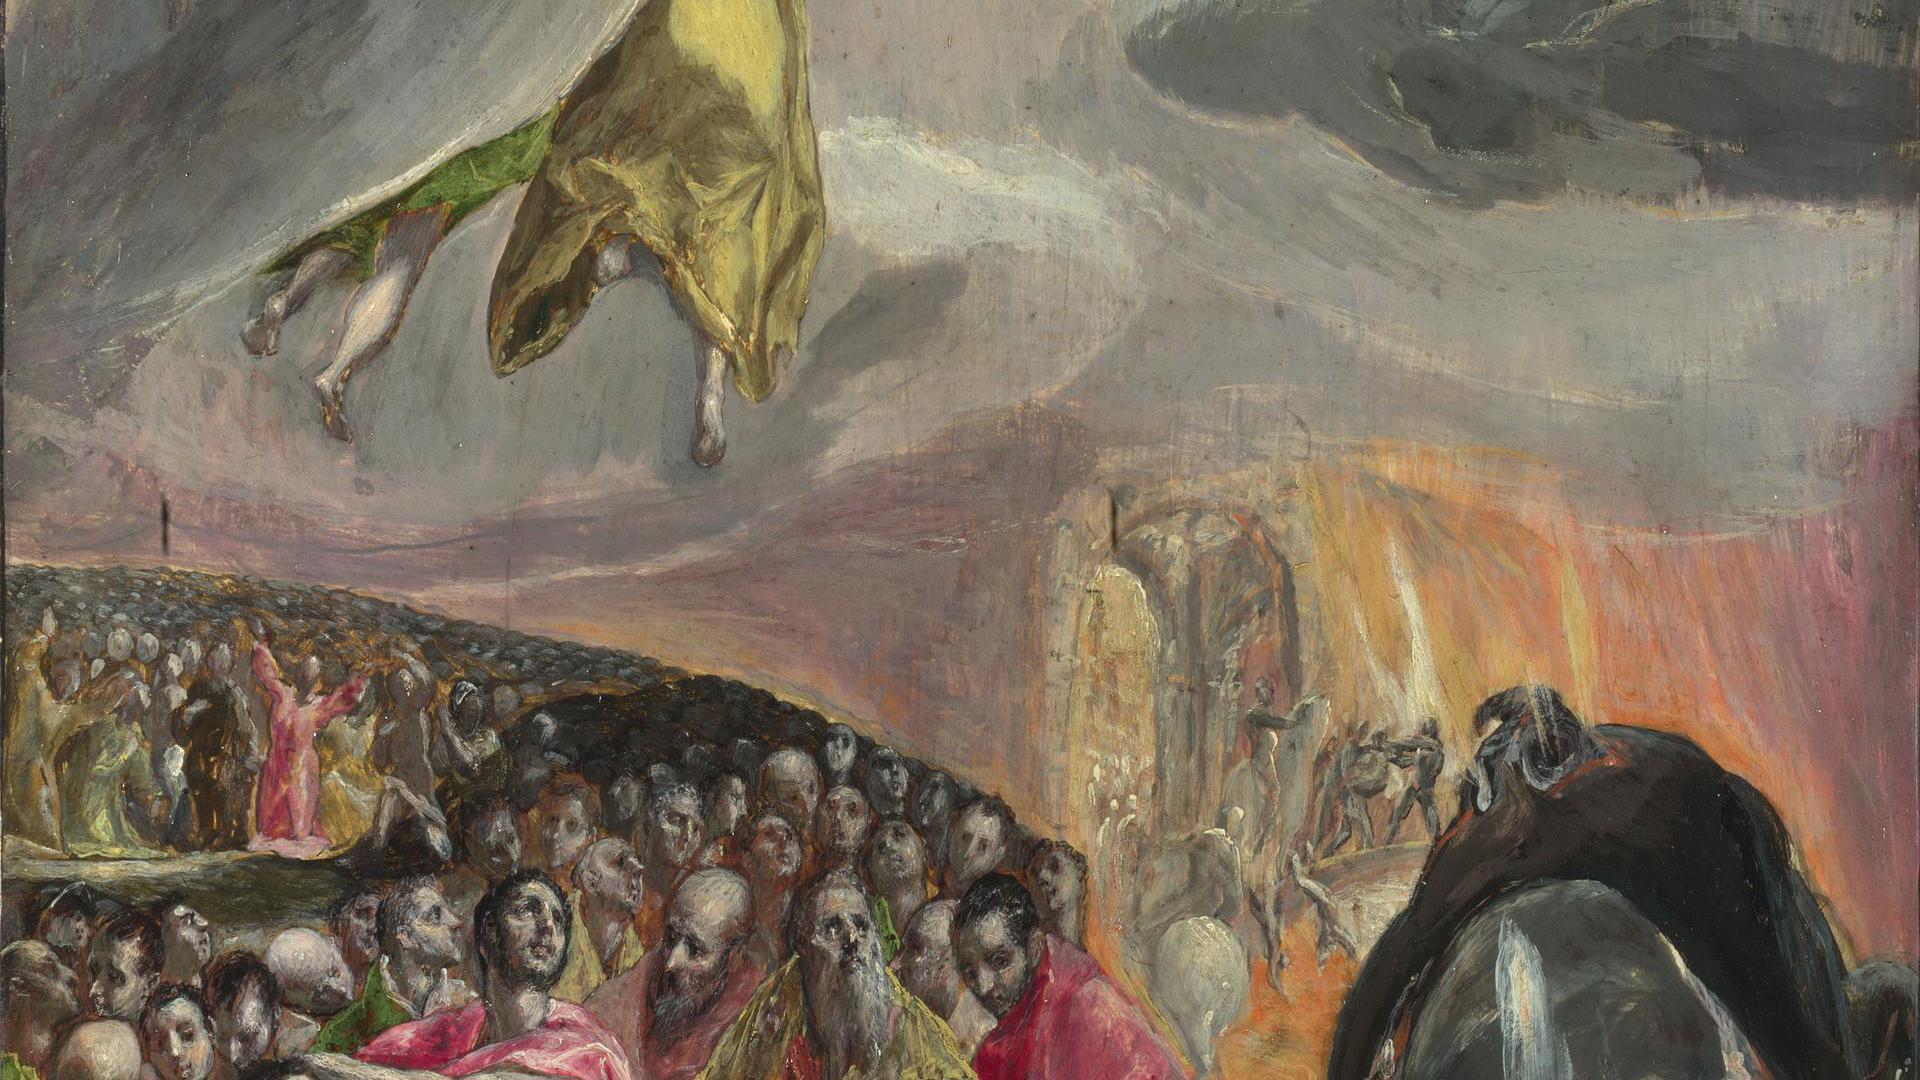 The Adoration of the Name of Jesus by El Greco